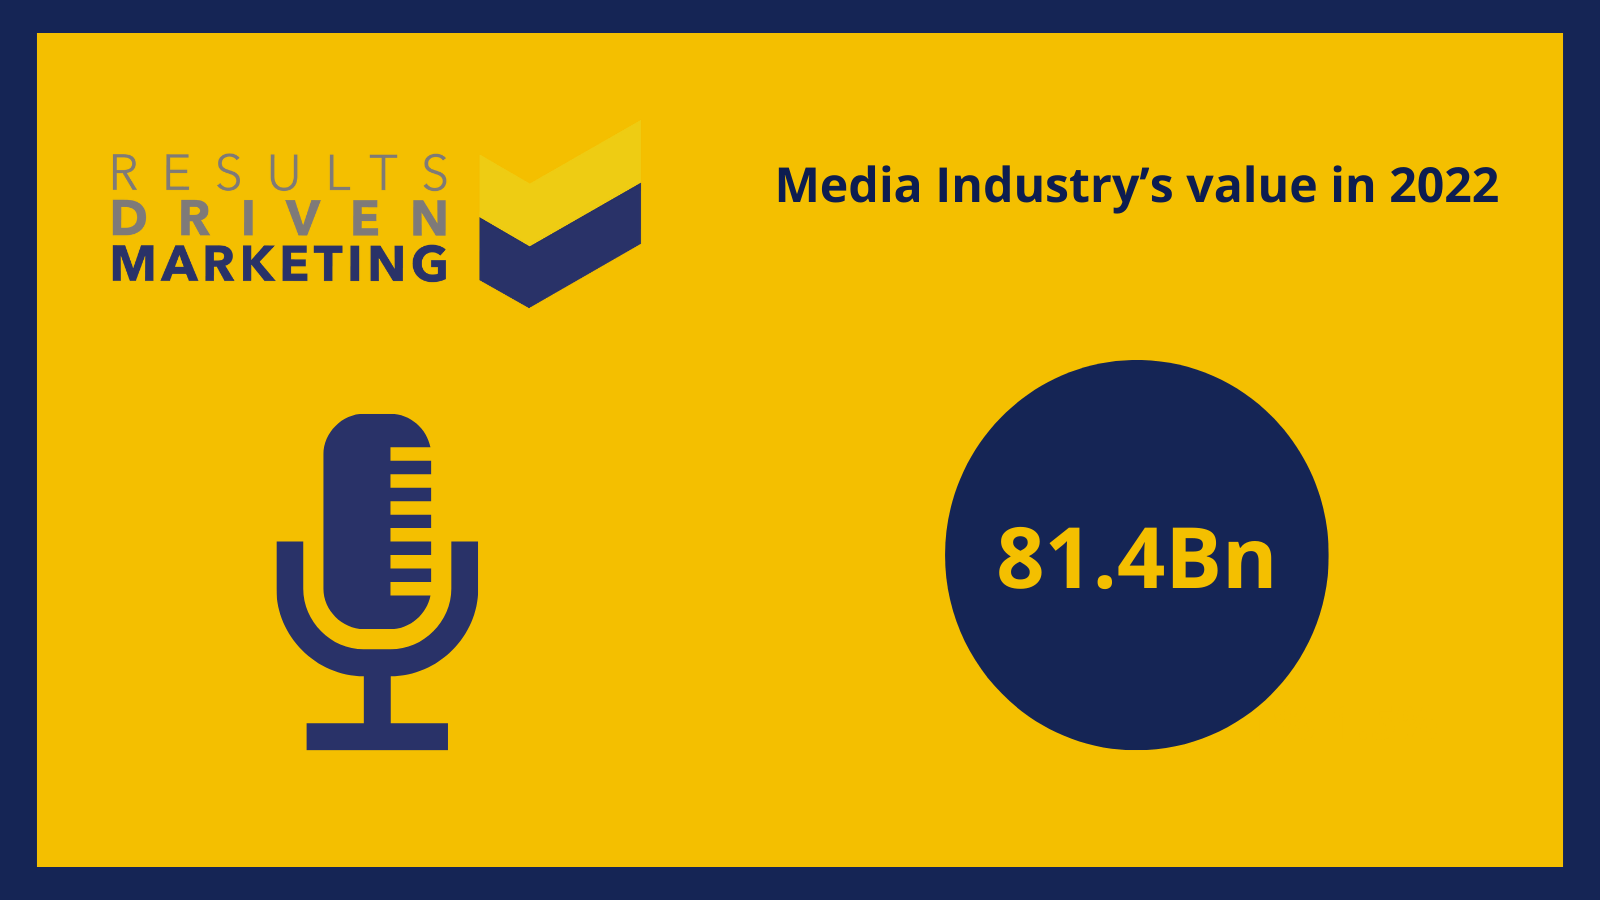 How big is the Media Industry in the UK?